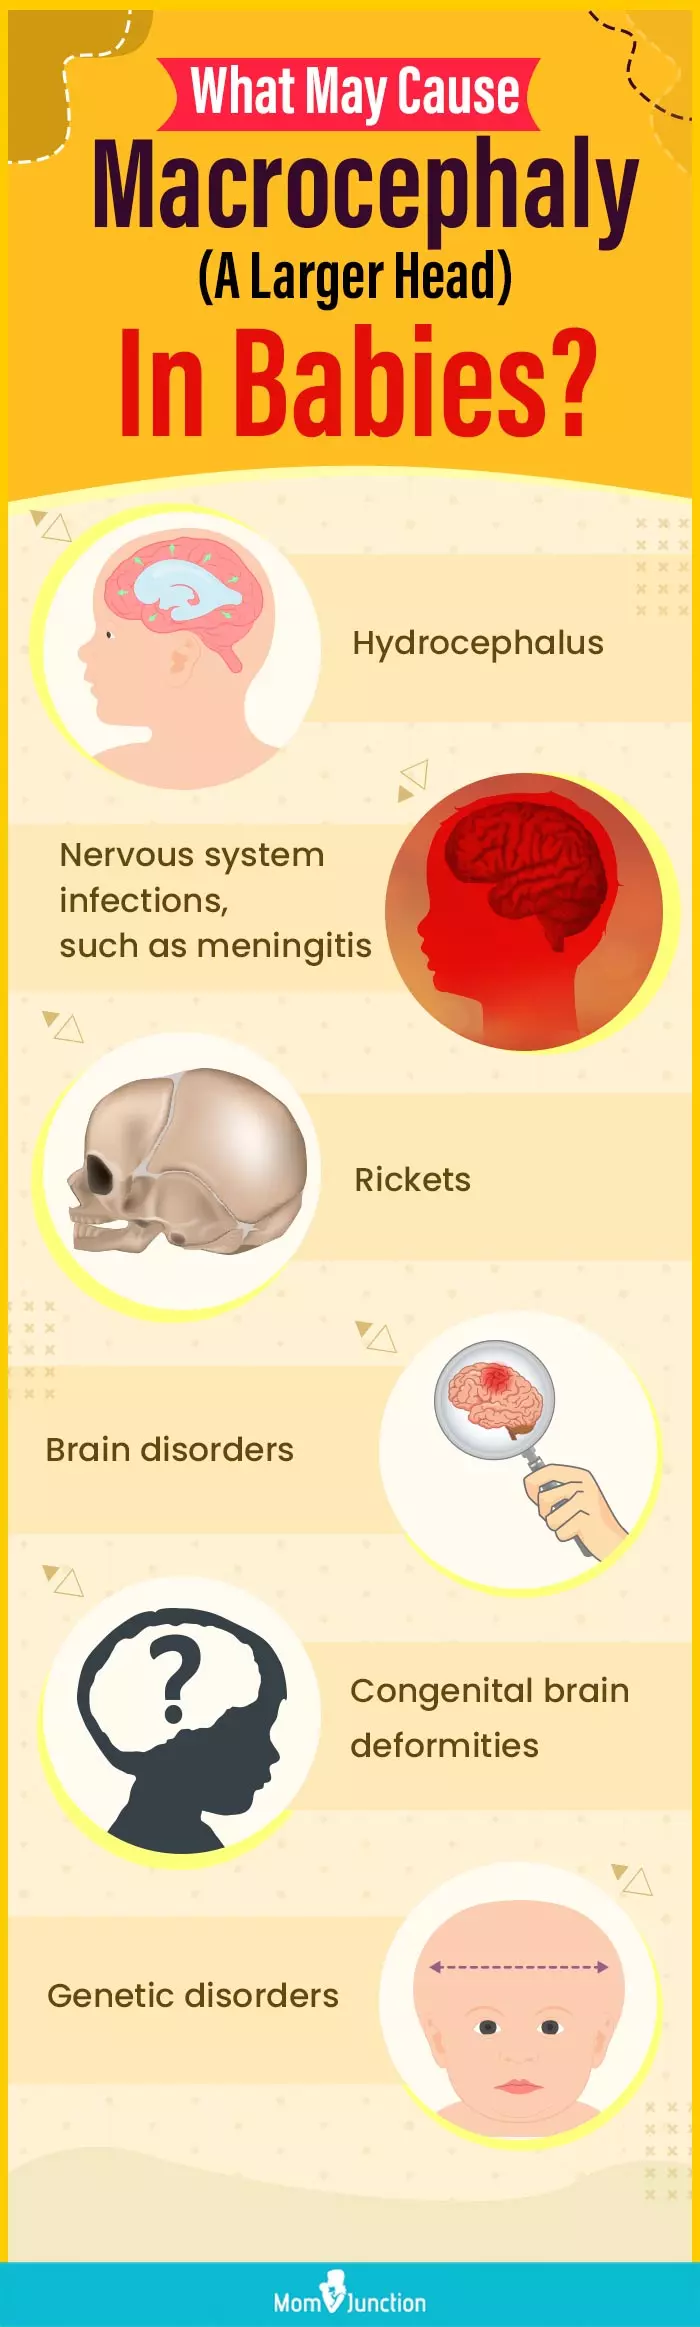 what may cause macrocephaly (a larger head) in babies (infographic)